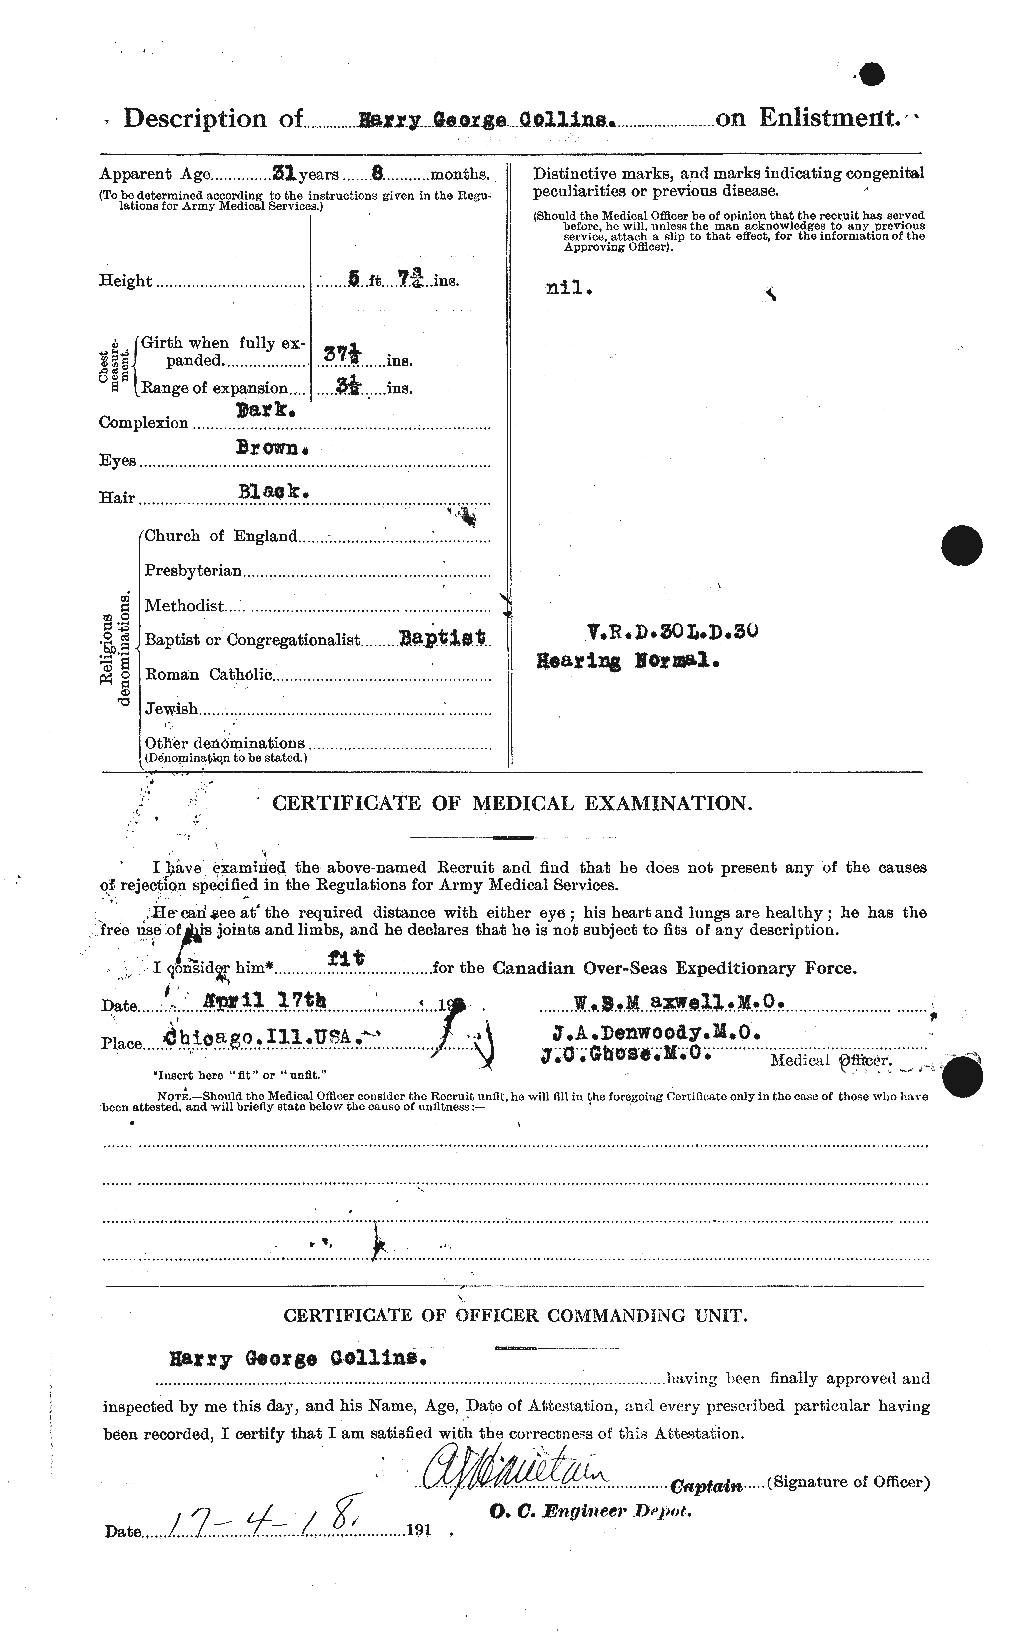 Personnel Records of the First World War - CEF 070019b